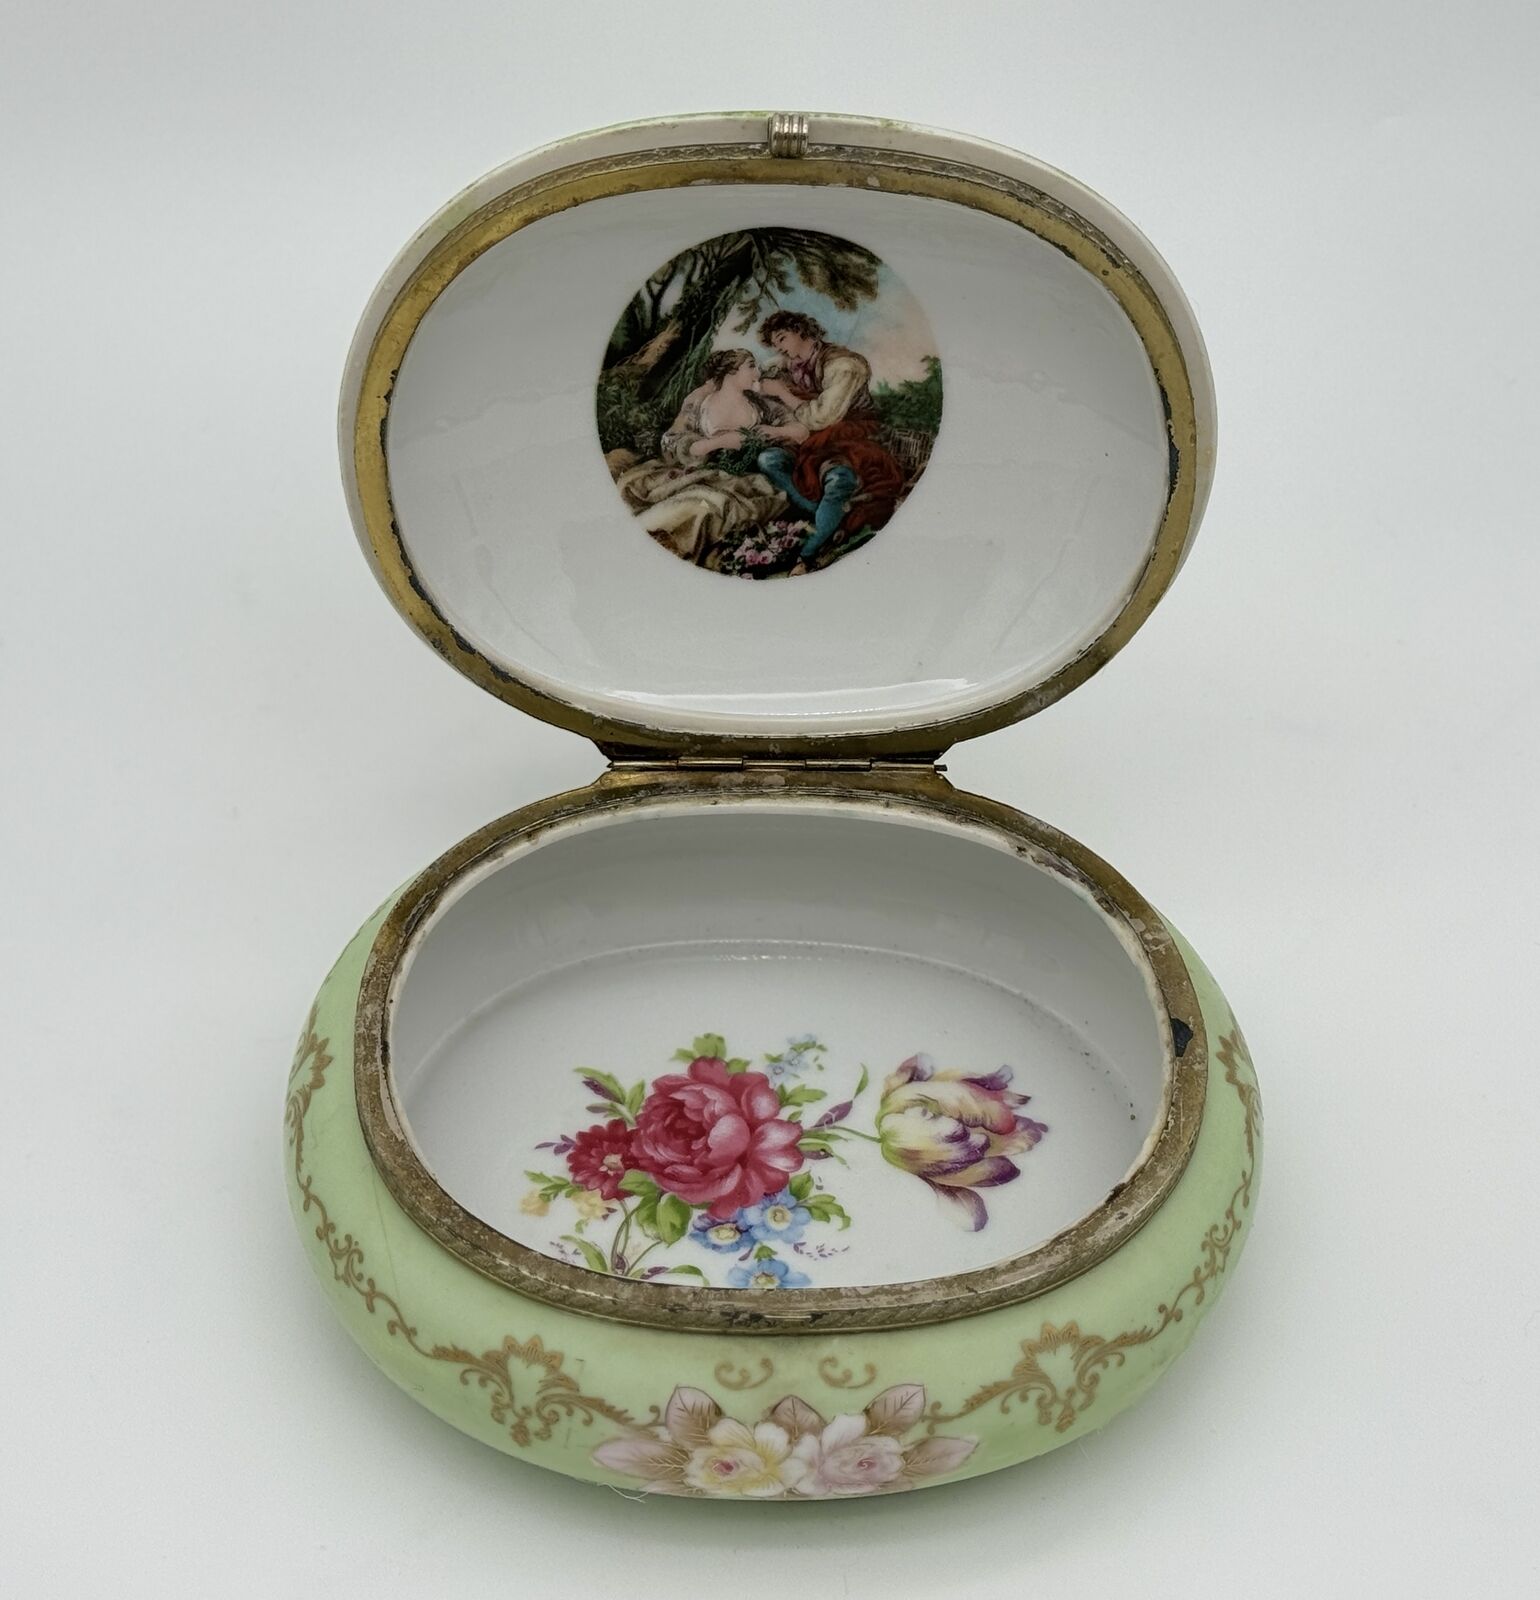 Antique Hand-Painted Porcelain Trinket Box with Gold Accents and Floral Design